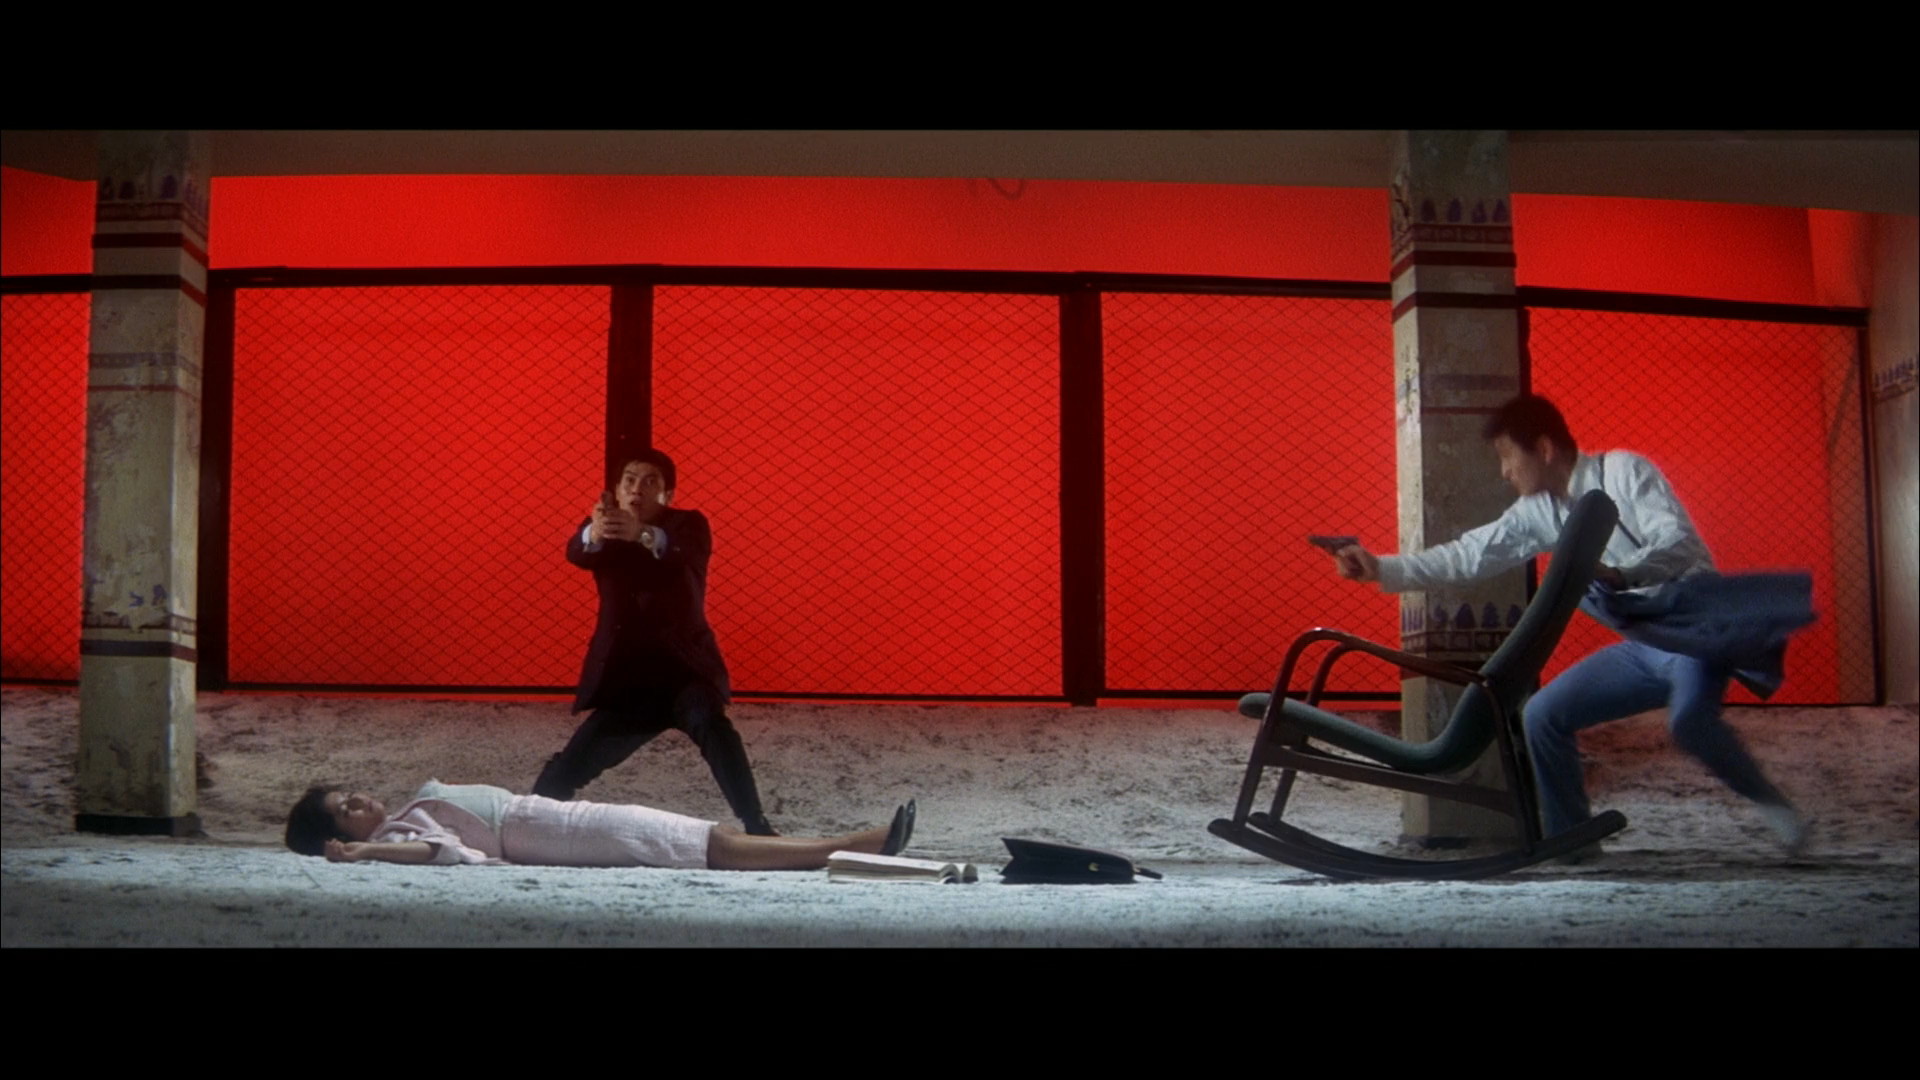 a colored picture of a scene from the yakuza movie called Tokyo Drifter, where two man are shooting and one woman is shot, lying on the floor